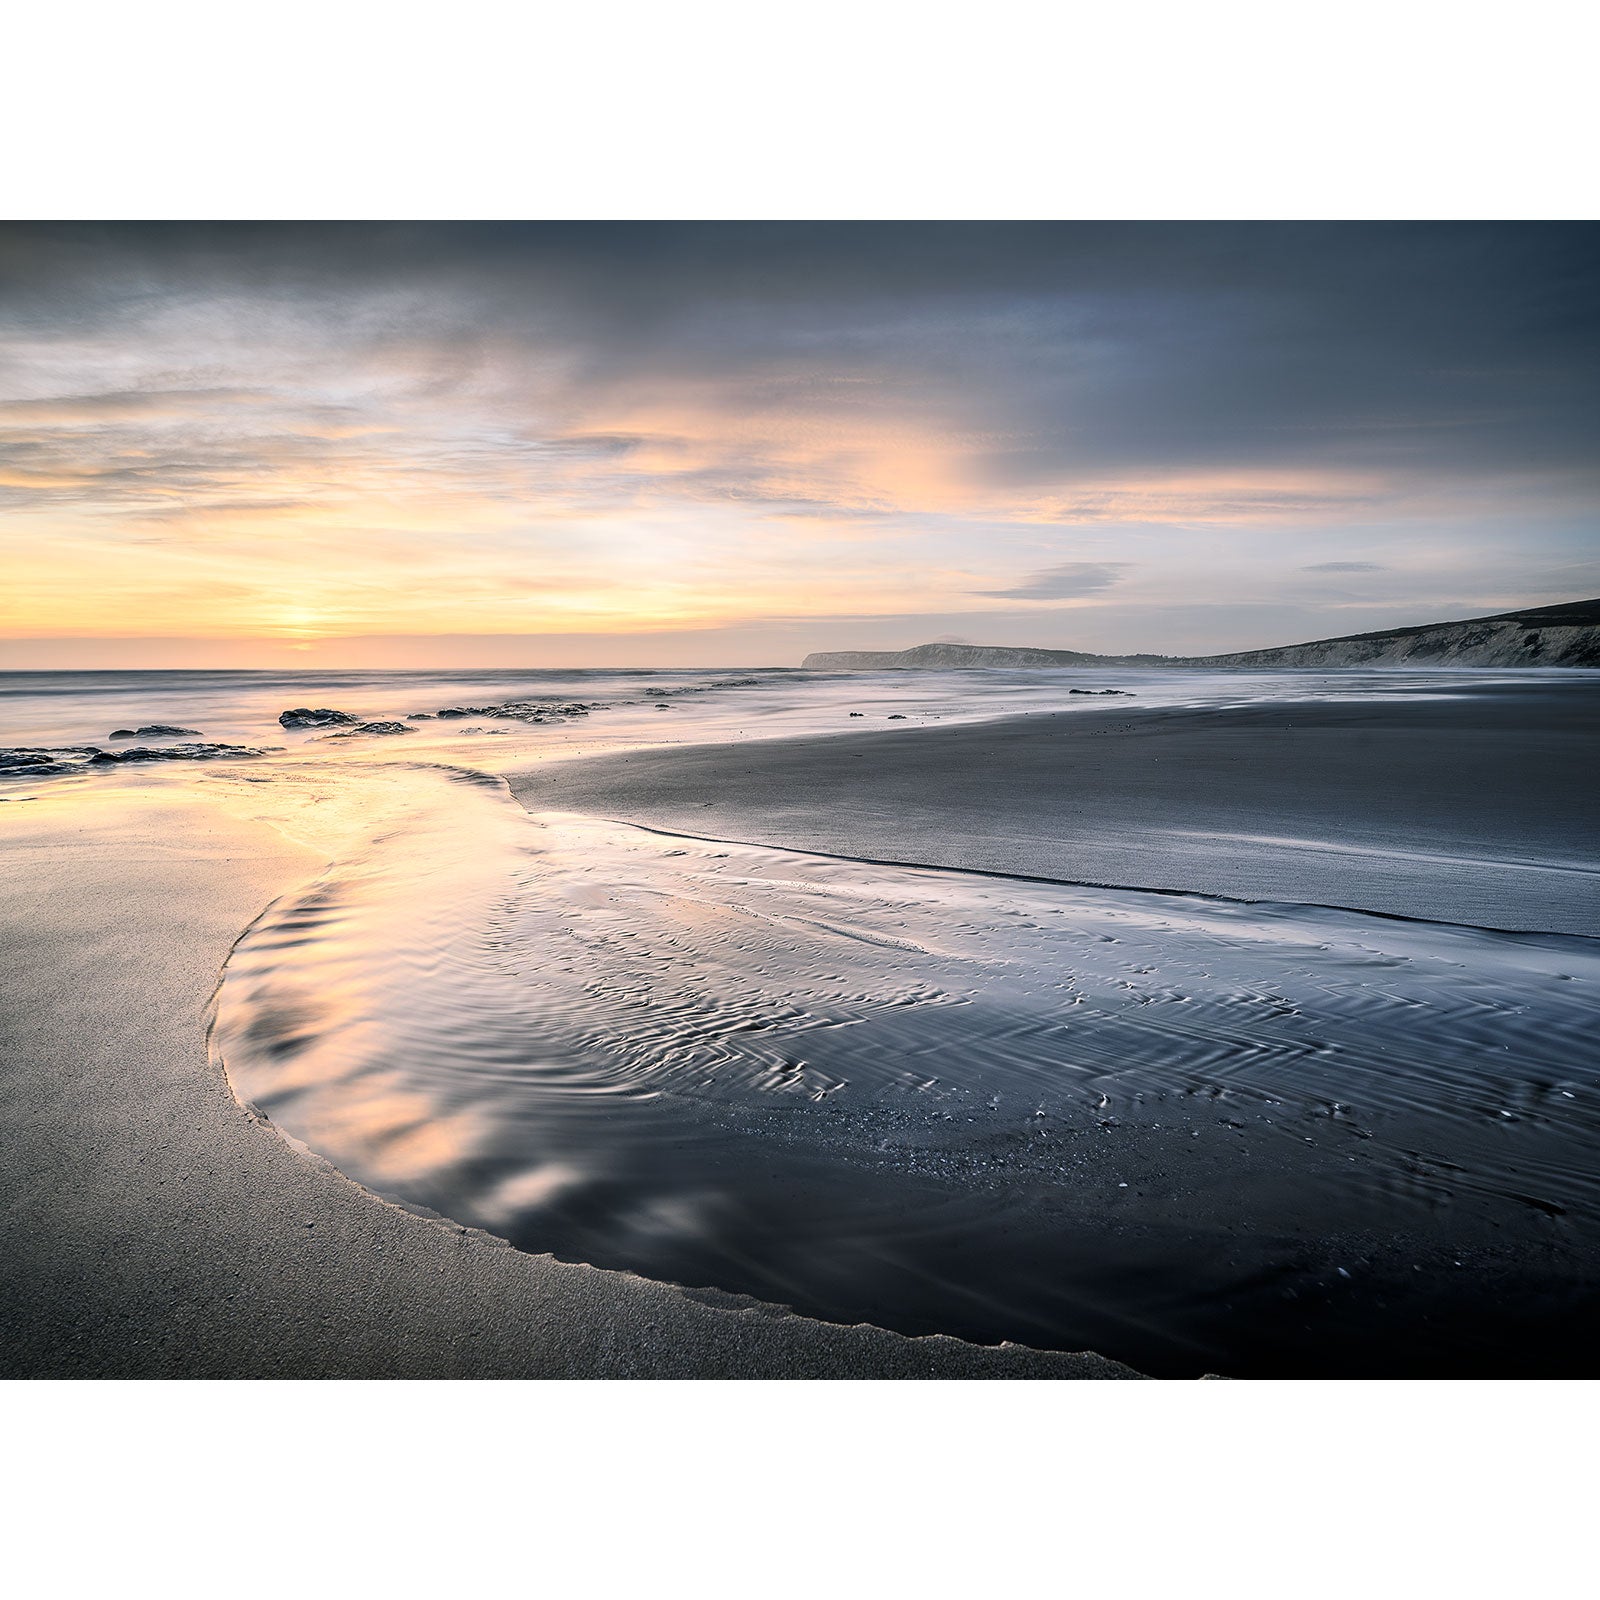 Sunset at Compton Bay, a peaceful beach on the Isle of Wight with gentle waves washing onto the shore and dunes in the background, captured by Available Light Photography.